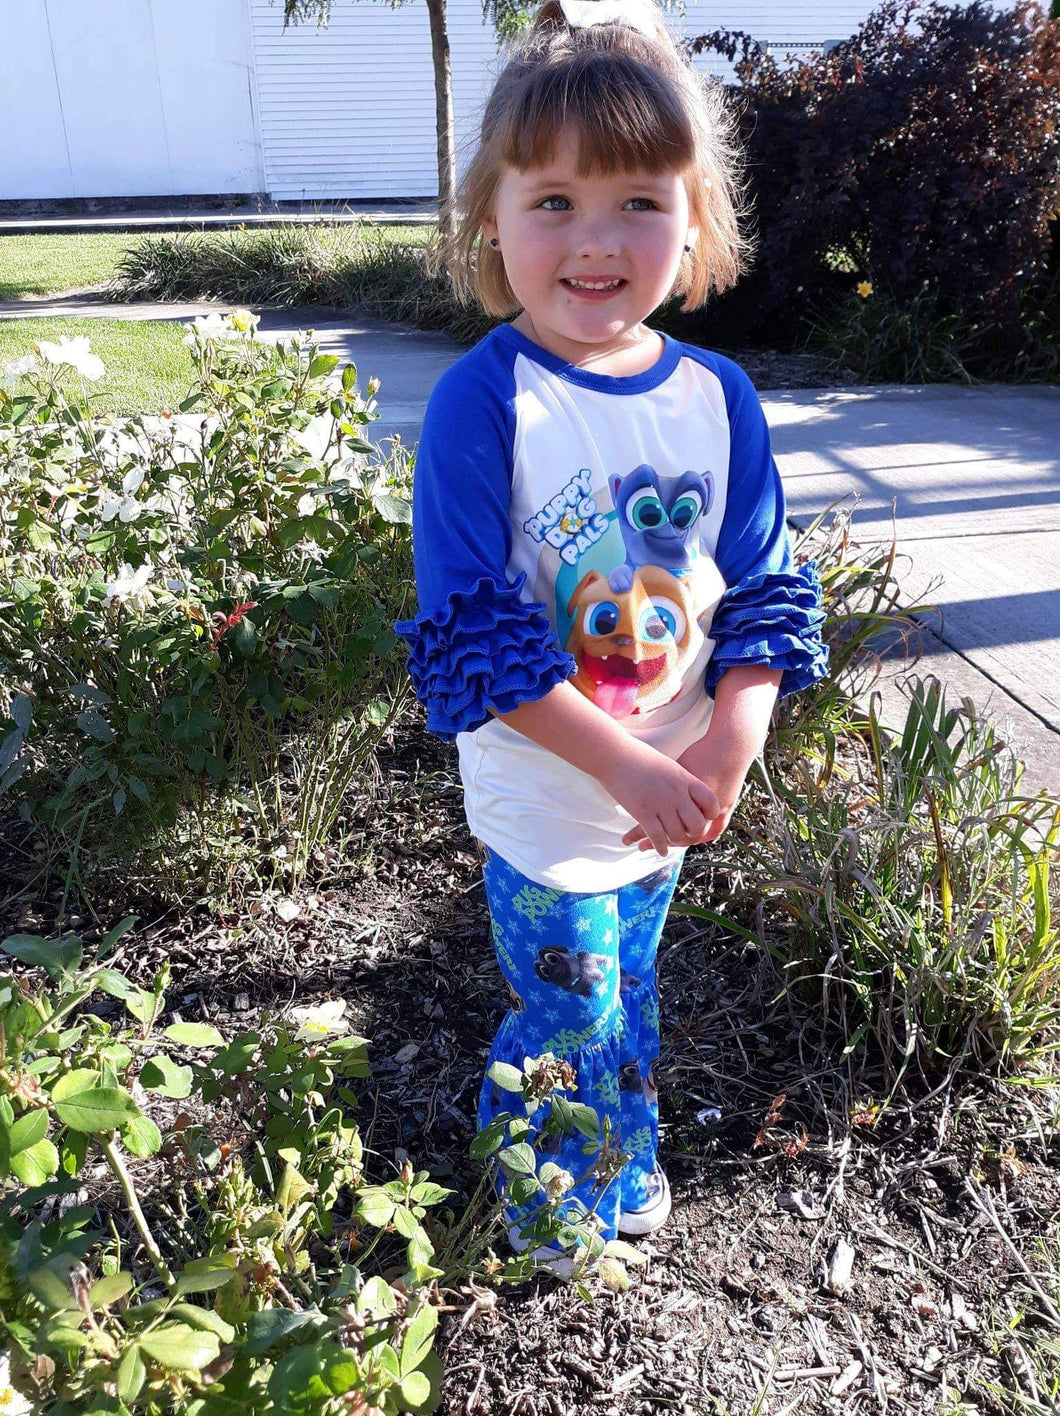 Puppy dog pals outfit